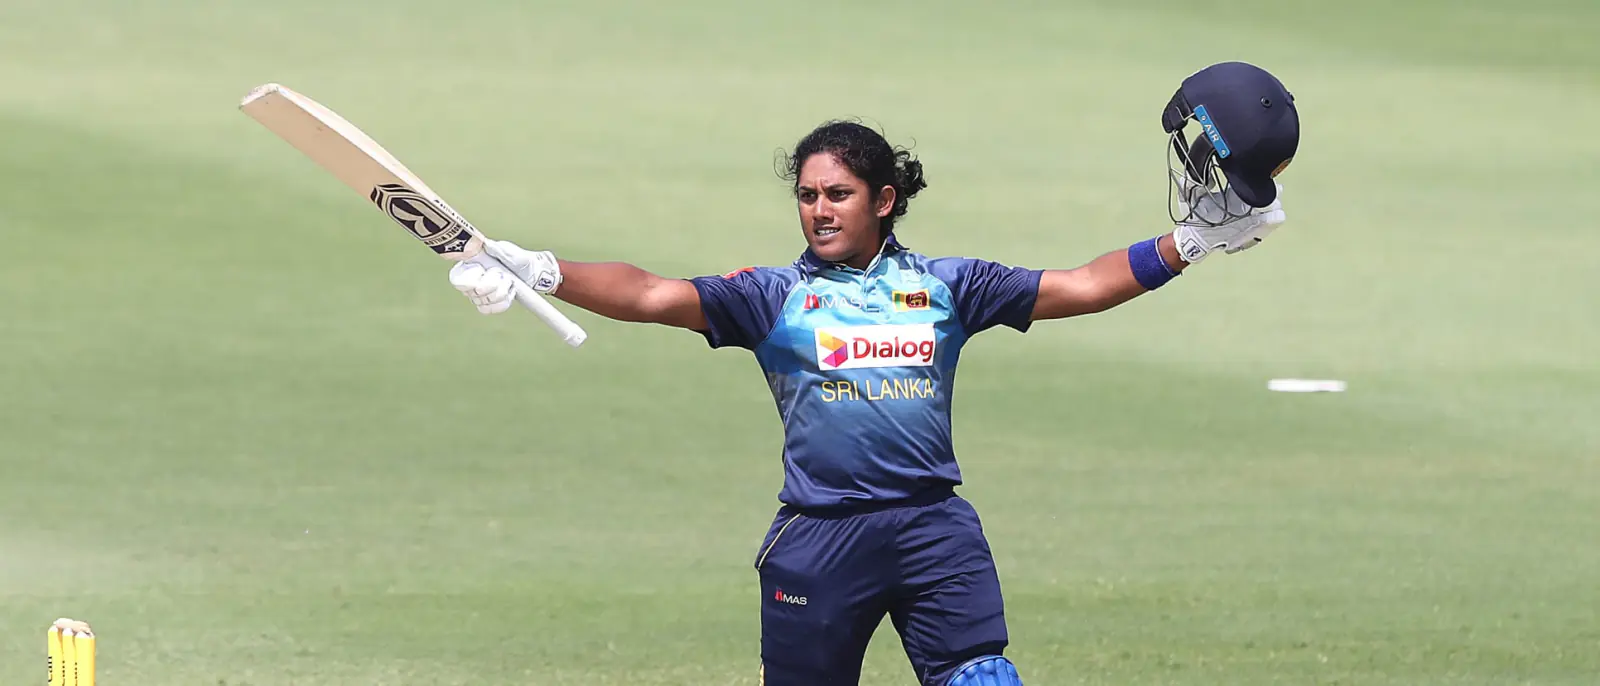 Sri Lanka became the first team to chase more than 300 runs in women's ODI cricket after Chamari Athapaththu missed a double century